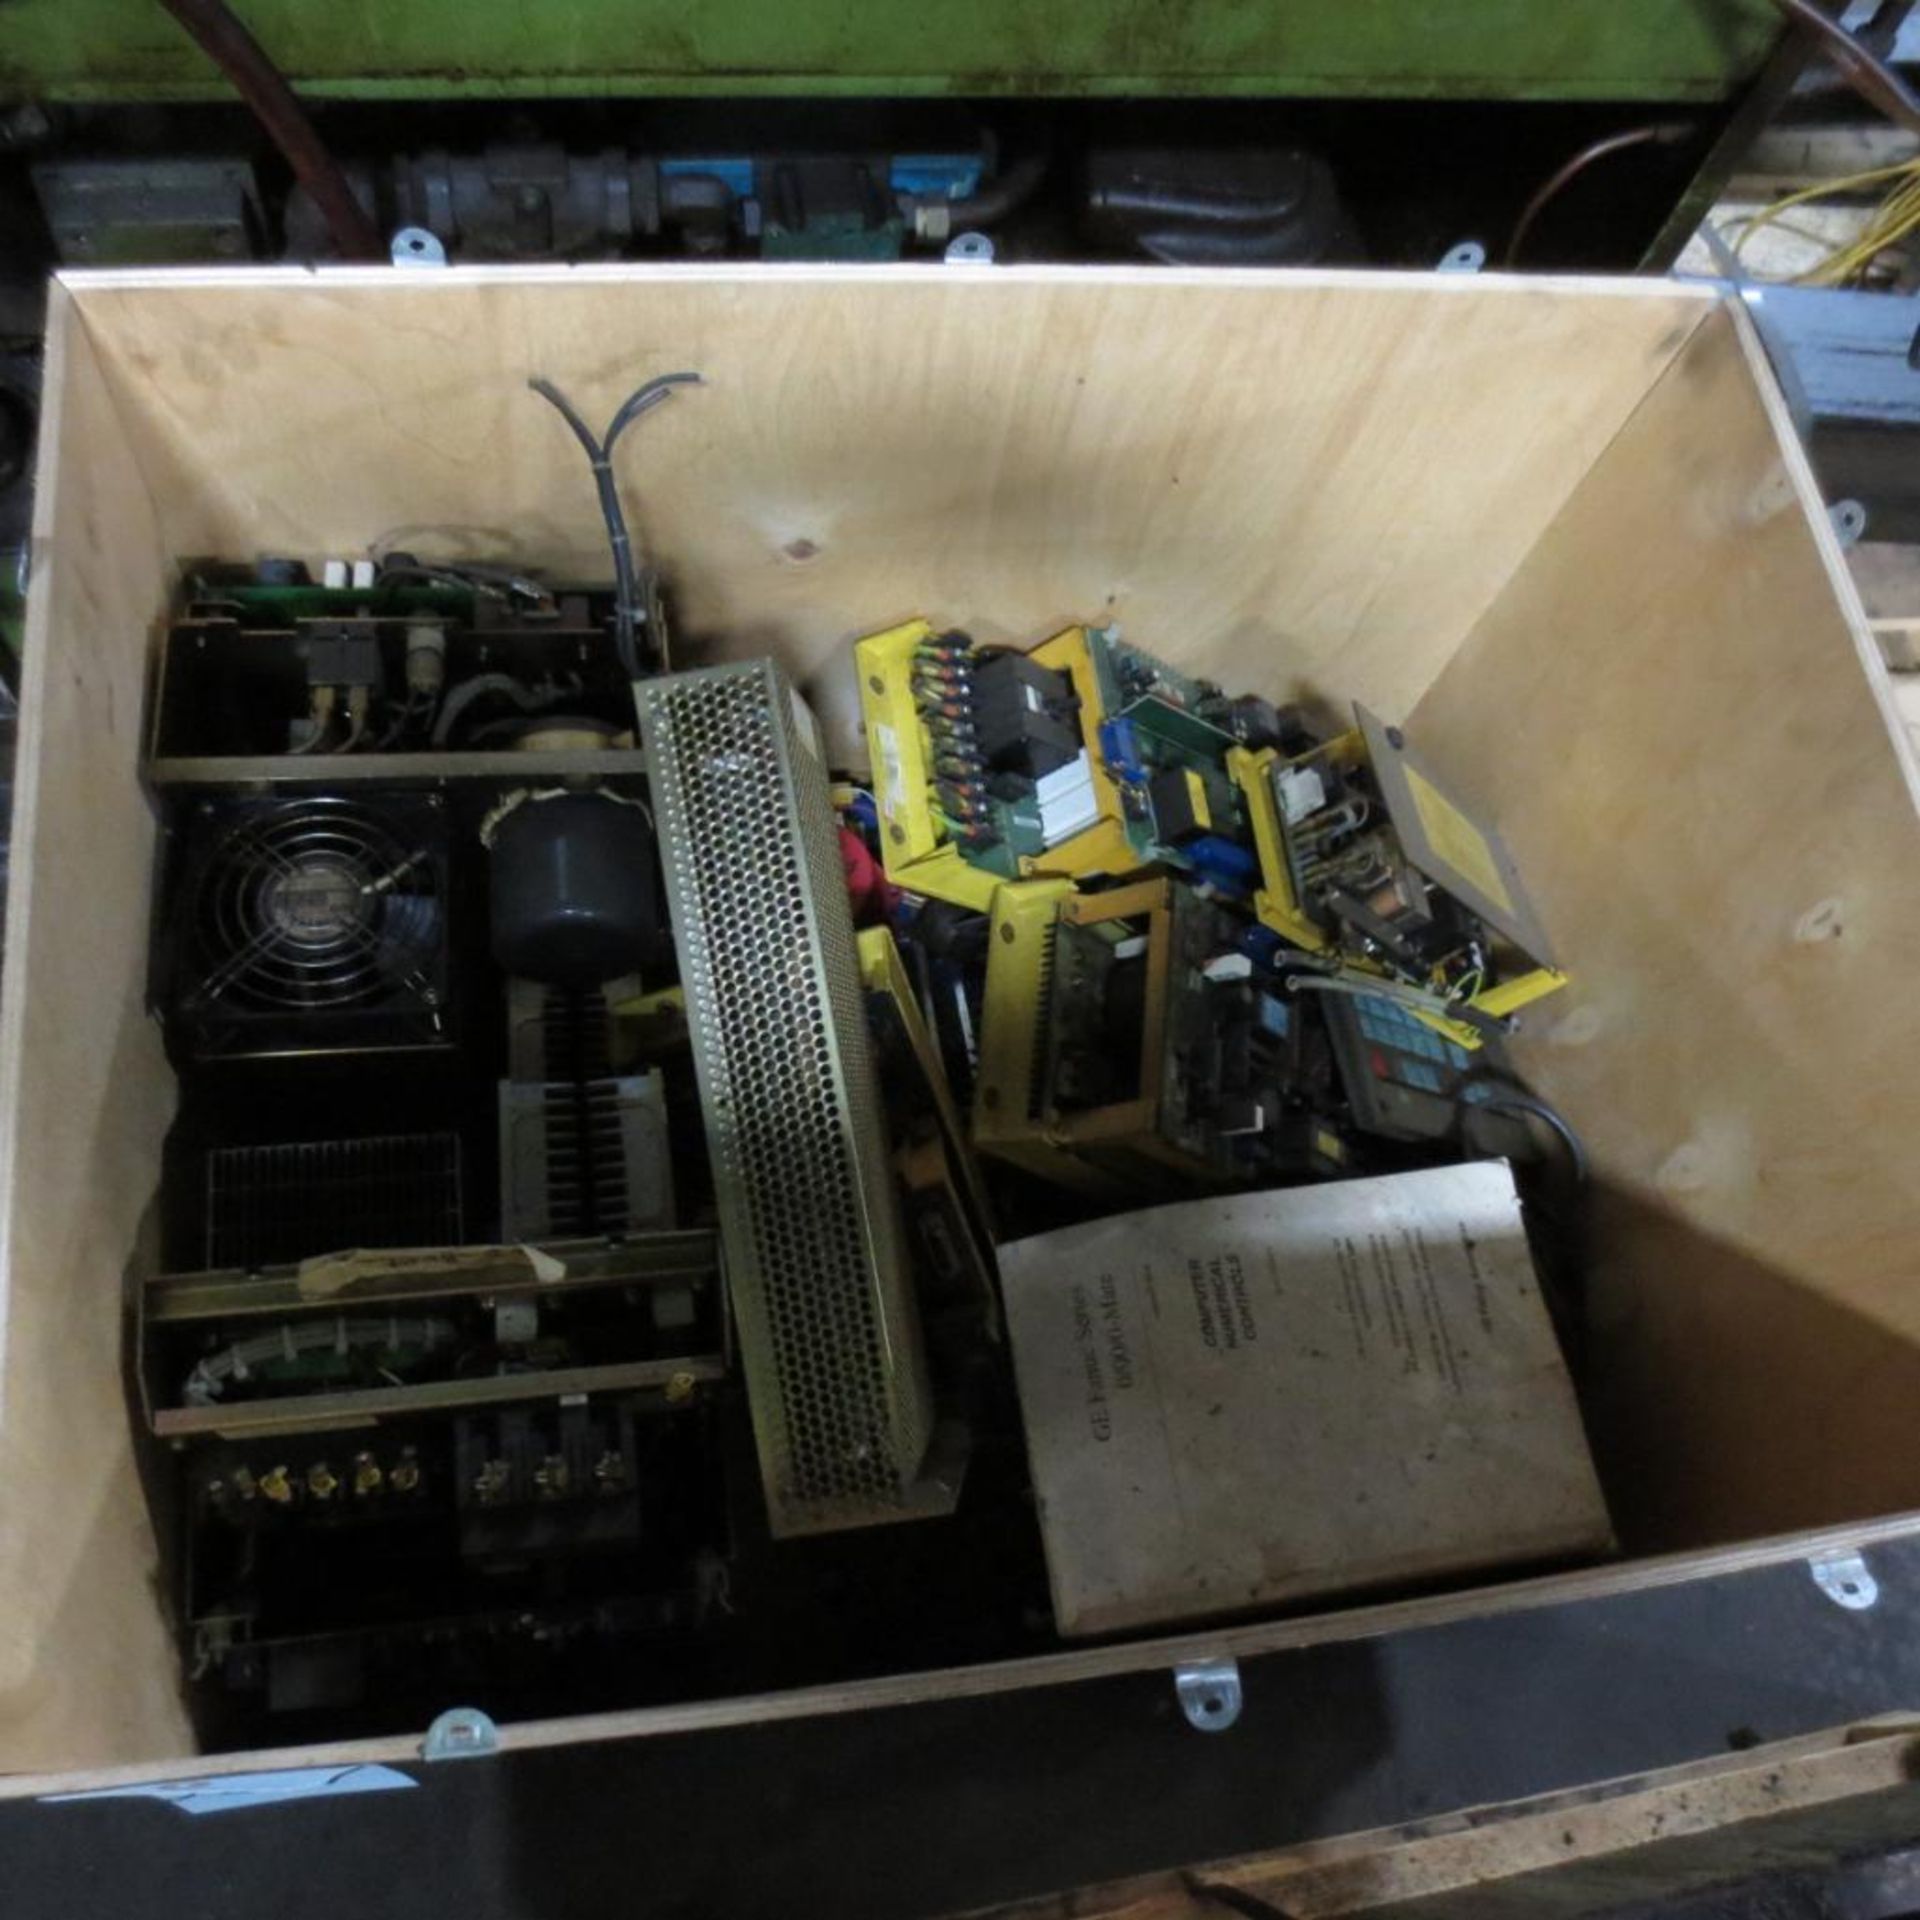 Electrical Boards and Tank. Loading Fee is $50.00 - Image 2 of 2